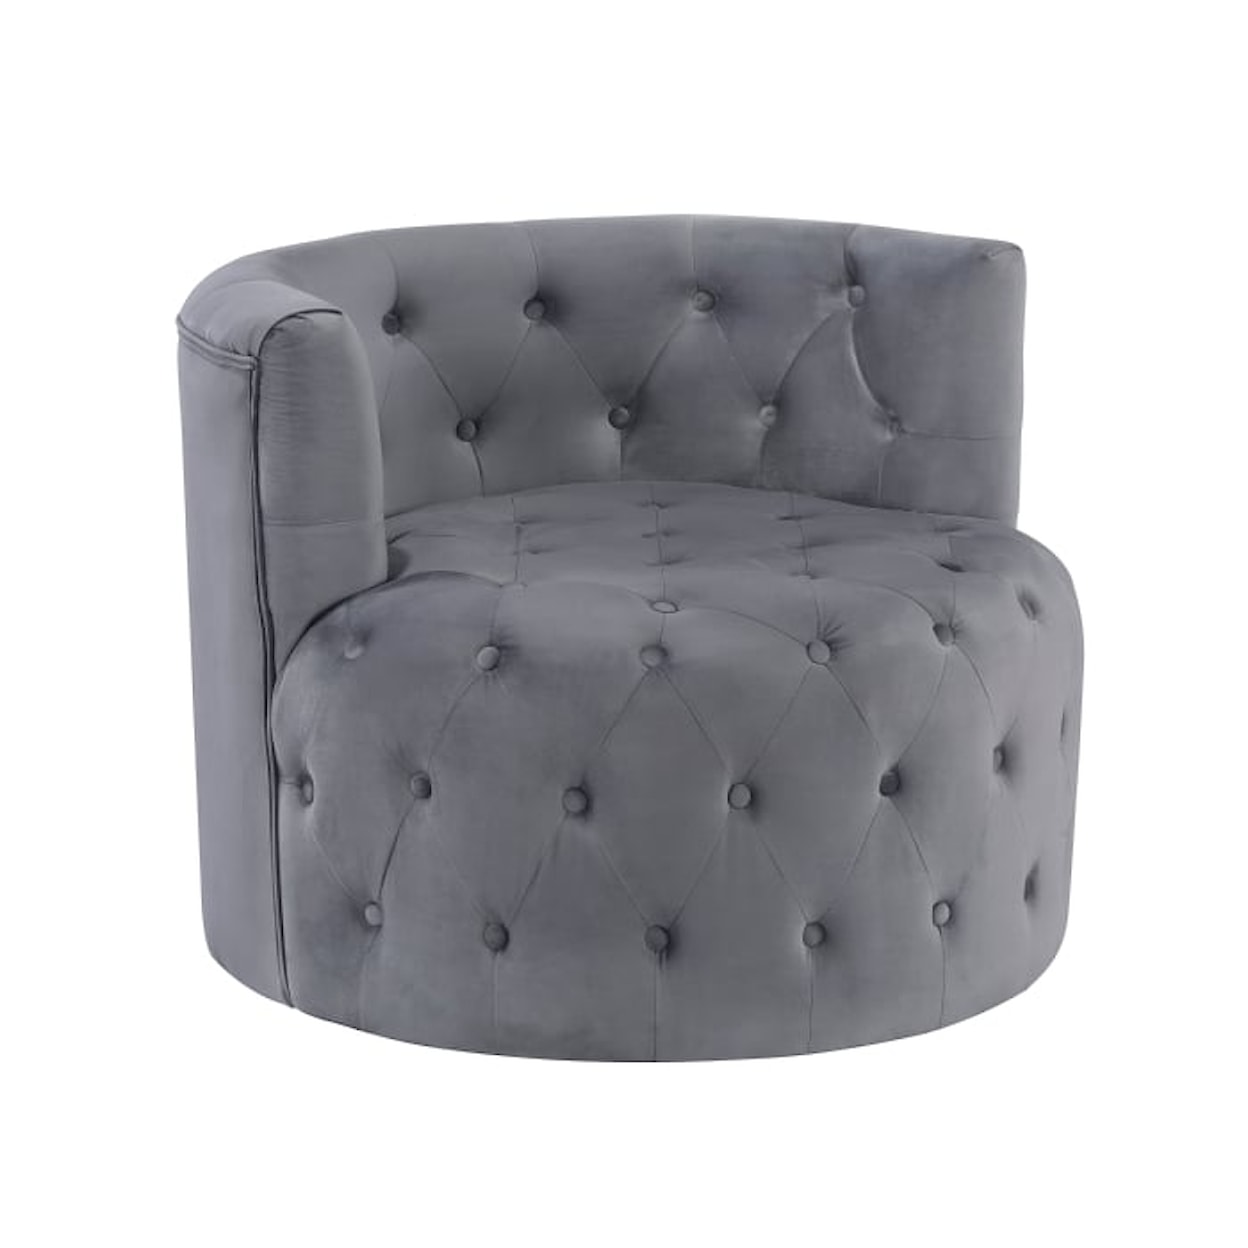 Homelegance Cheswold Swivel Chair